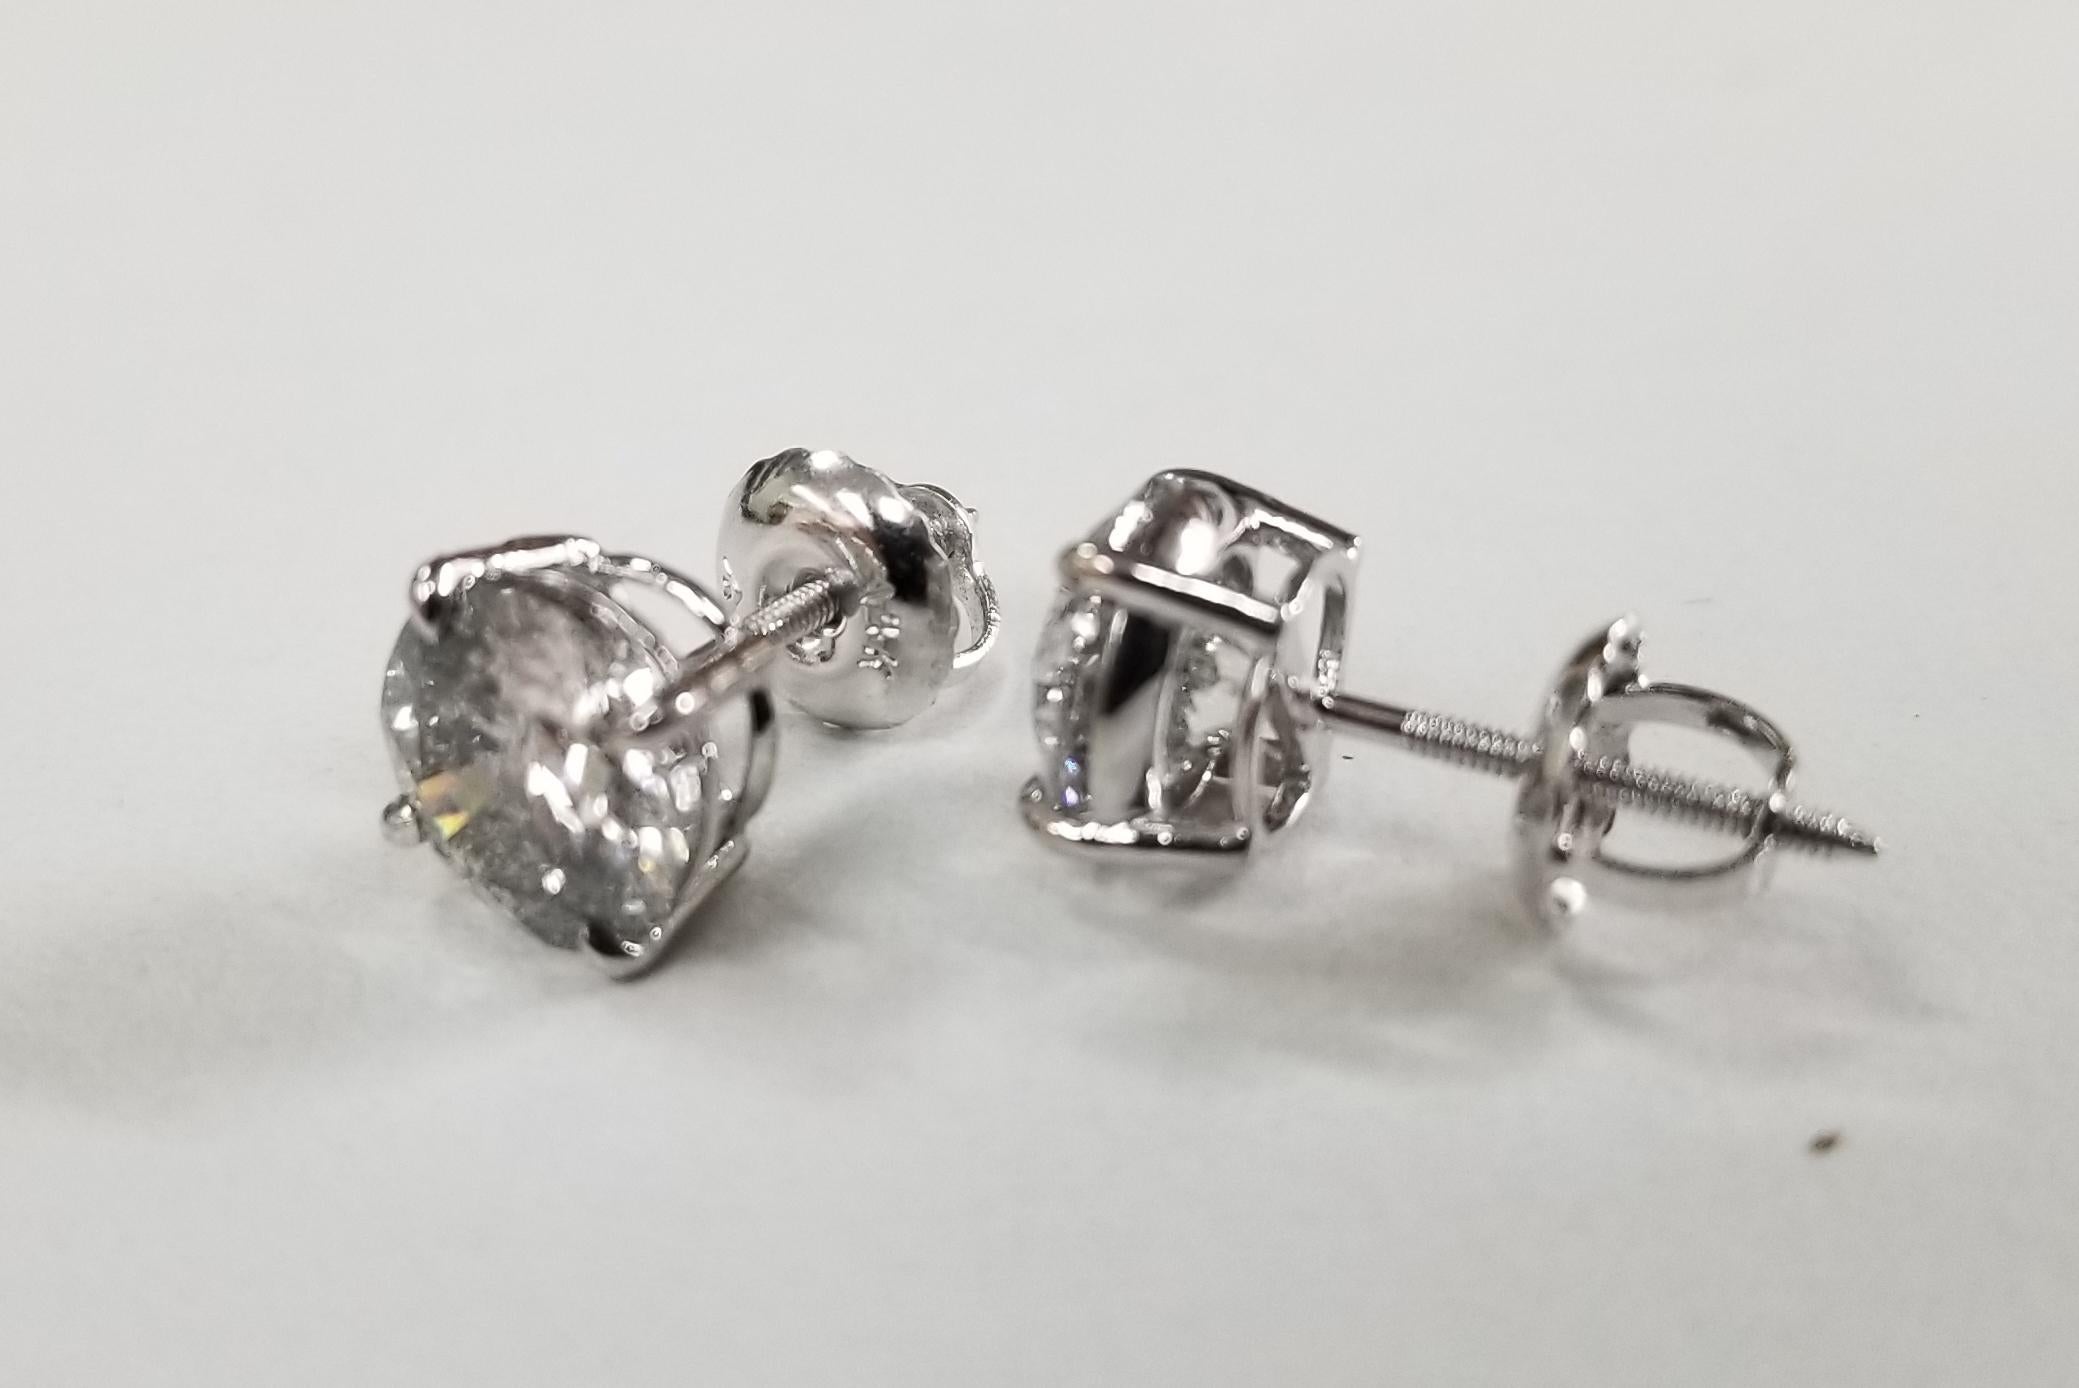 14k Gold Diamond Stud Earrings with Diamond Halo-Jackets Total Weight 2.71 Carat In New Condition For Sale In Los Angeles, CA